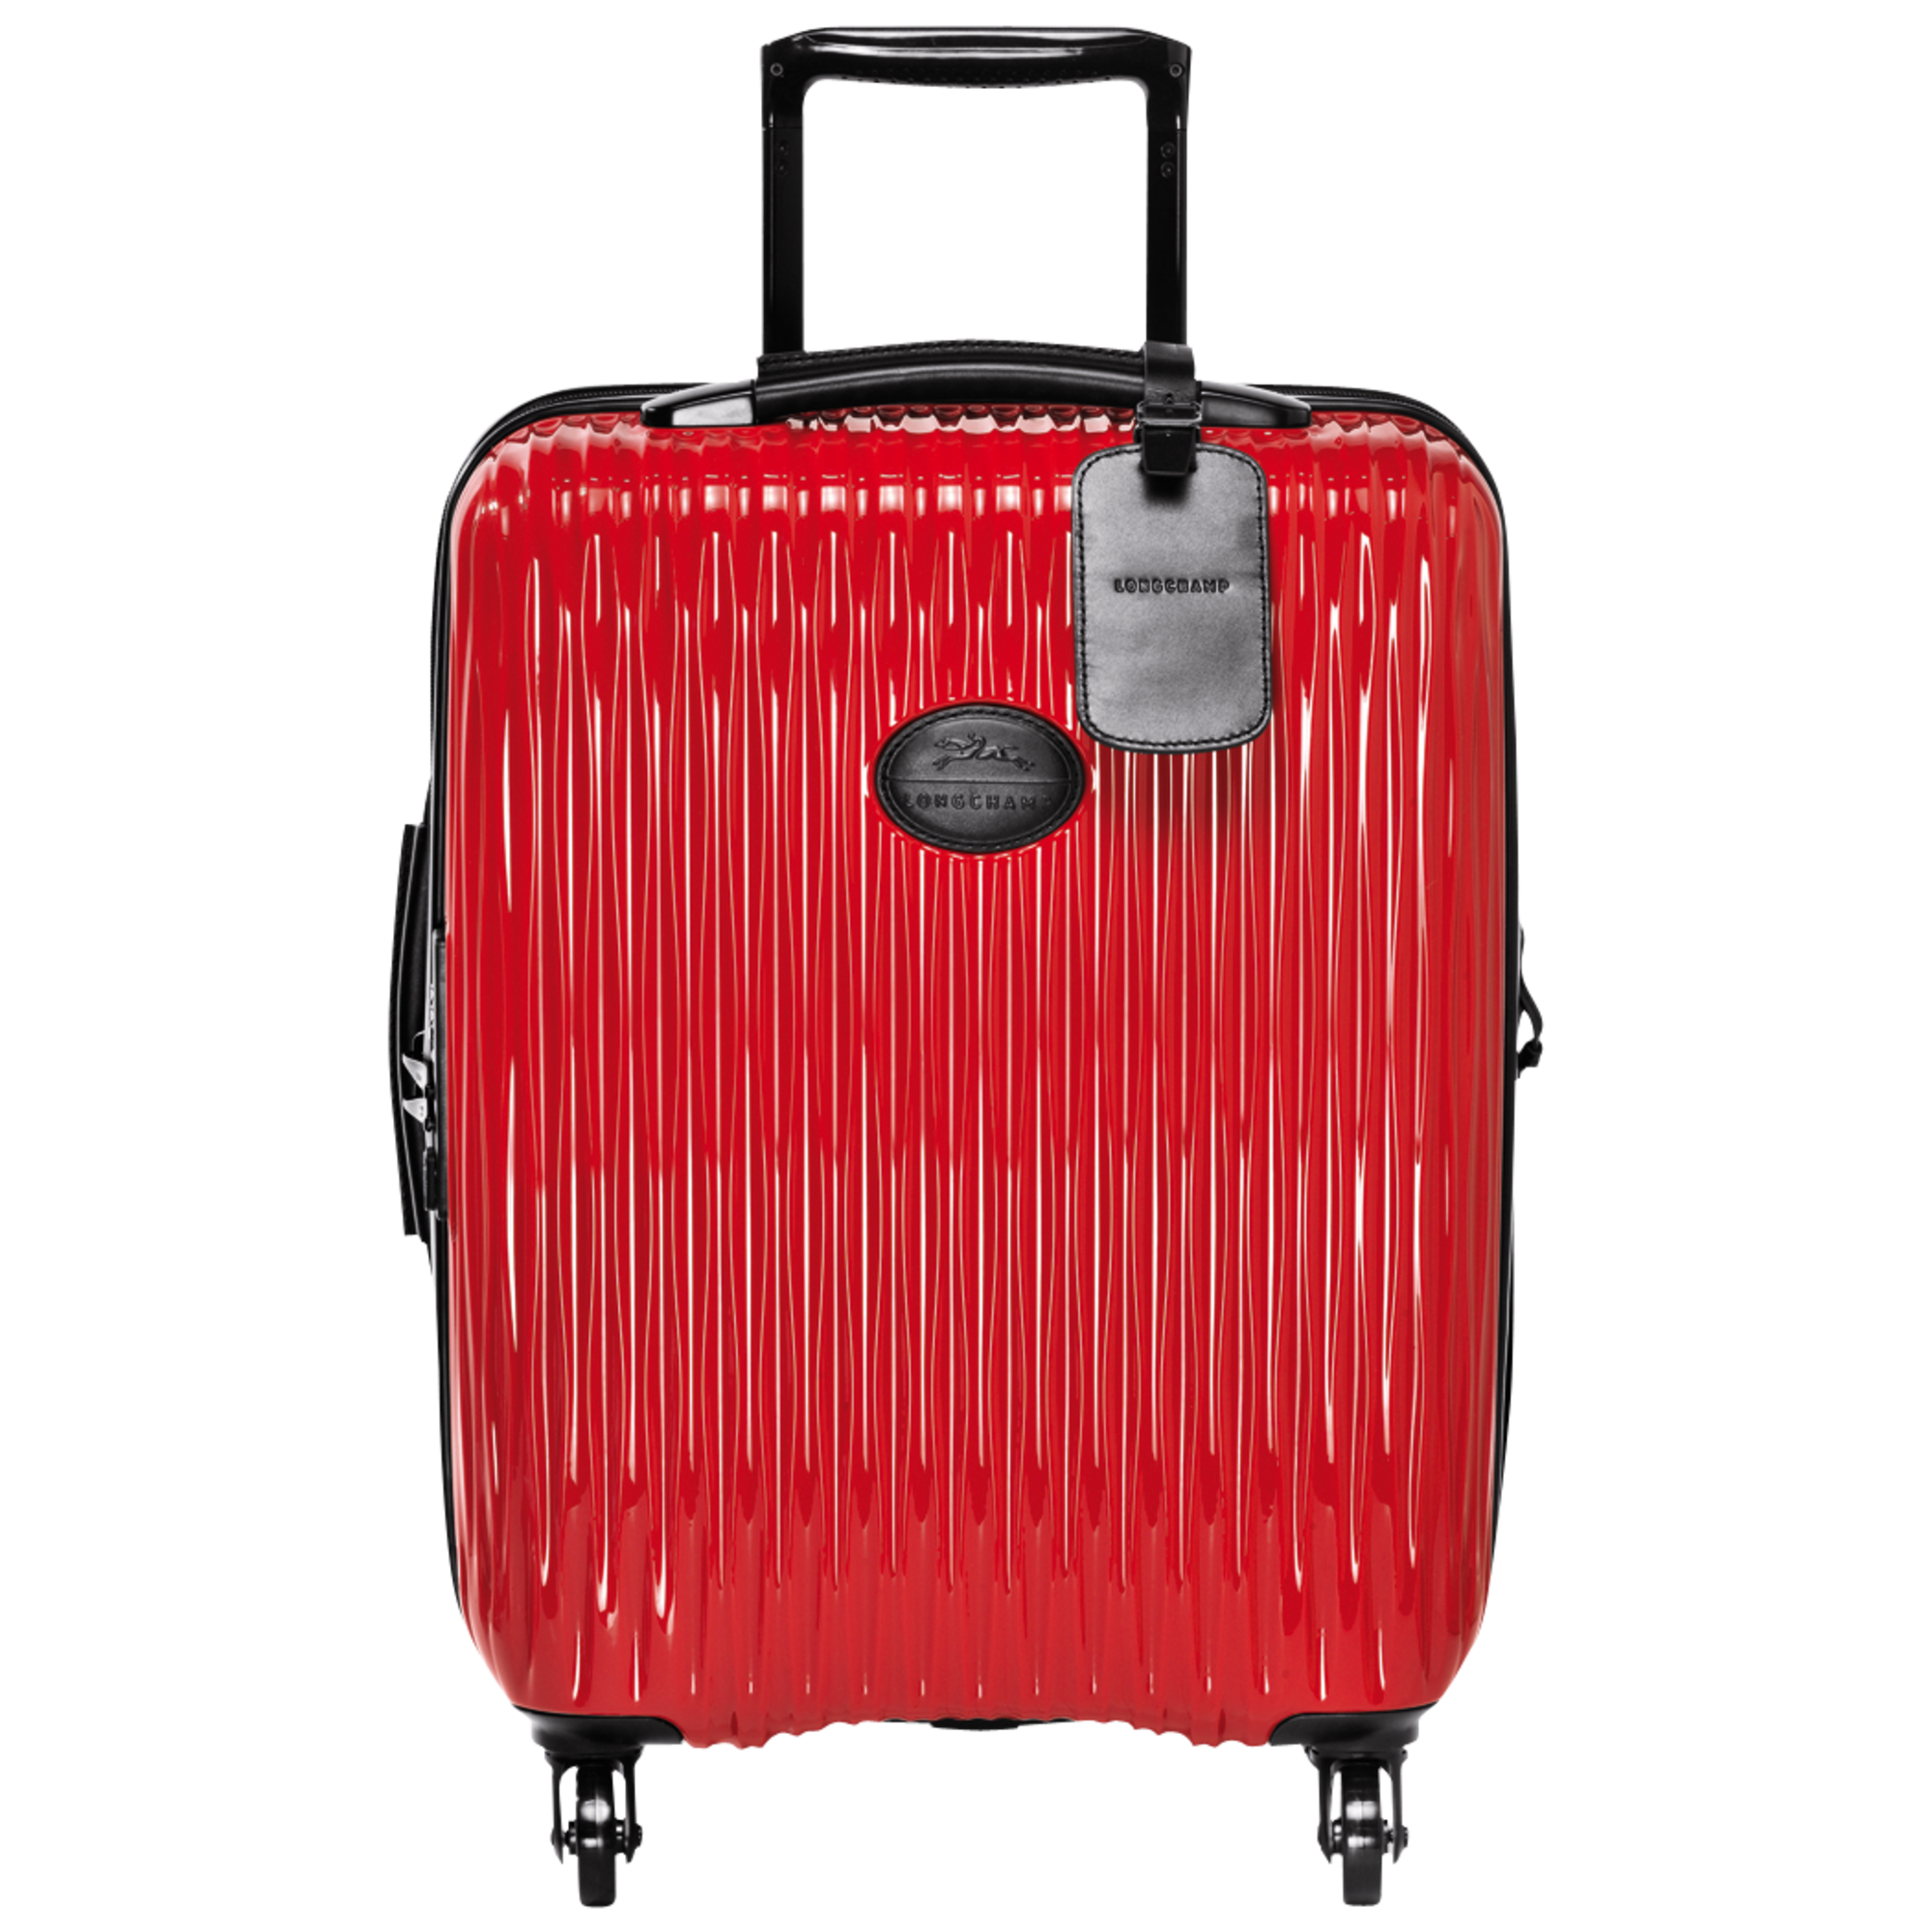 Cabin suitcase Fairval Red (L1404989545 